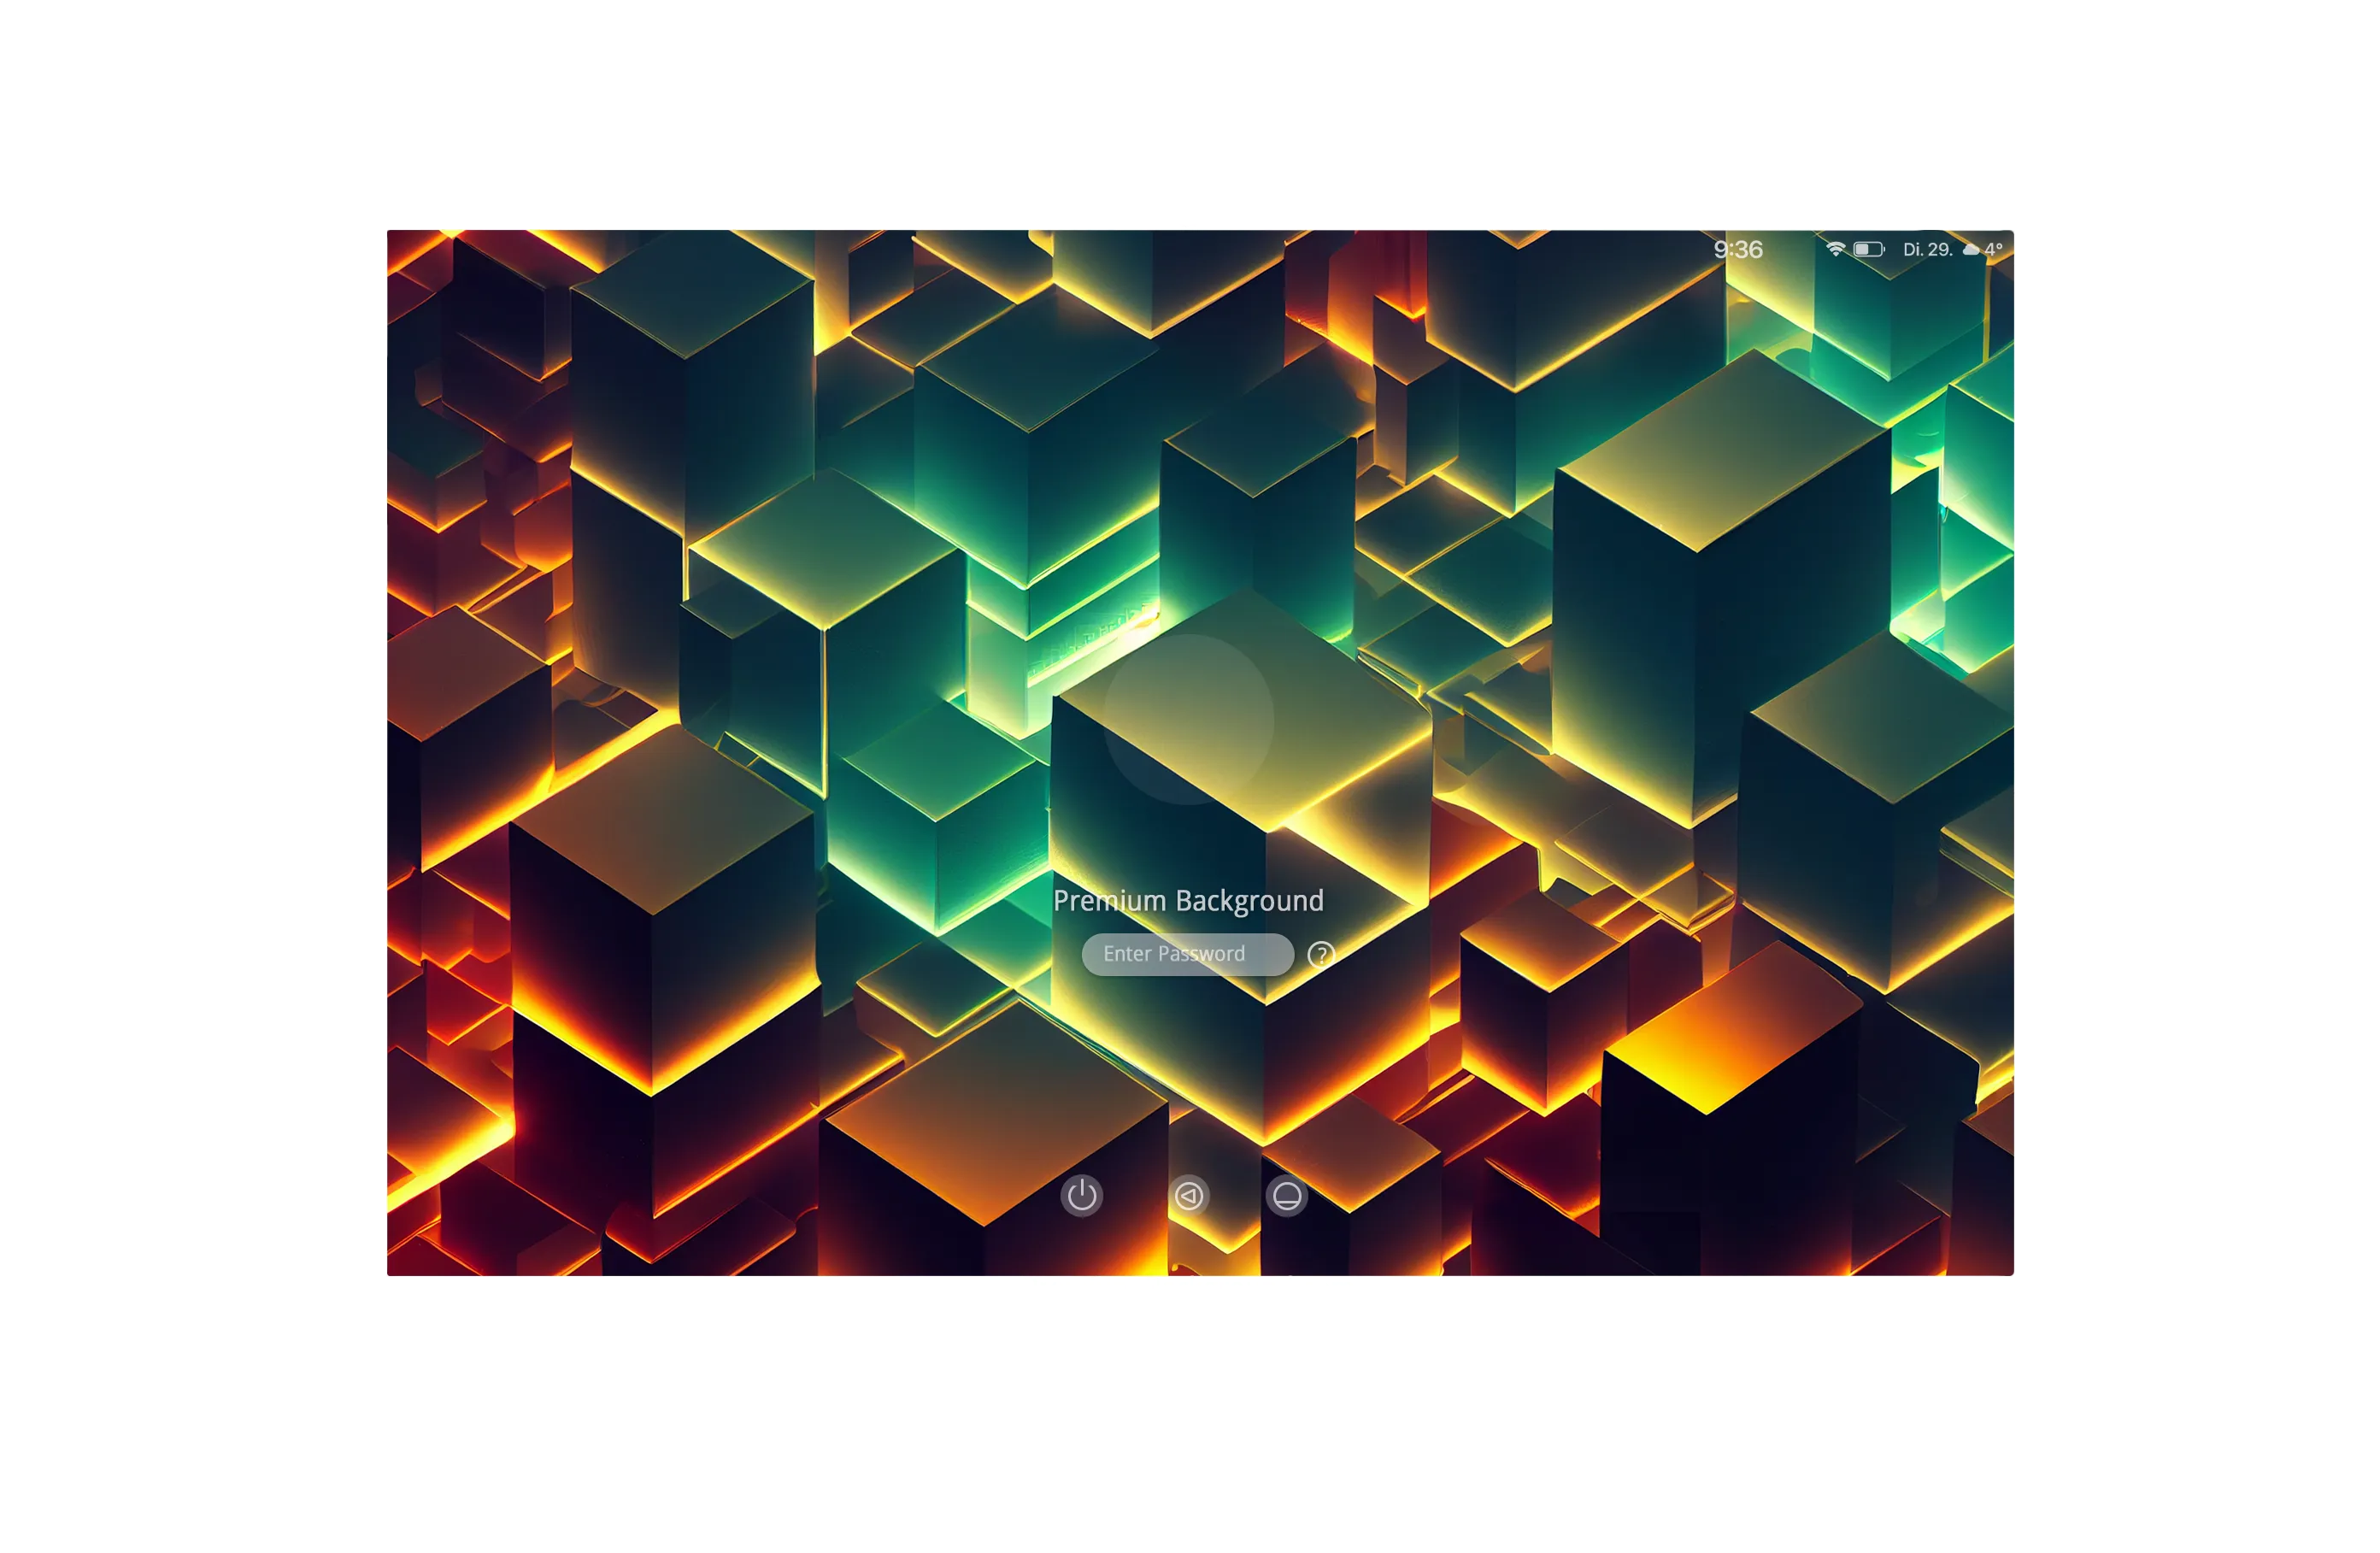 Free high resolution 4k luxury backgrounds for MacBook, MacBook Pro, MacBook Air and Ipad, Ipad Pro, Ipad Air, Ipad mini backgrounds. 3d-illustration, abstract, art, artistic, background, beautiful, beauty, blue, bright, brochure, brush, canvas, closeup, color, colorful, creative, decoration, design, drawing, dye, graphic, green, grunge, hot, illustration, image, ink, light, luxury, macro, material, paint, paper, pattern, poster, purple, red, shape, shiny, stain, style, surface, texture, textured, ultraviolet, wallpaper, water, watercolor, web, white